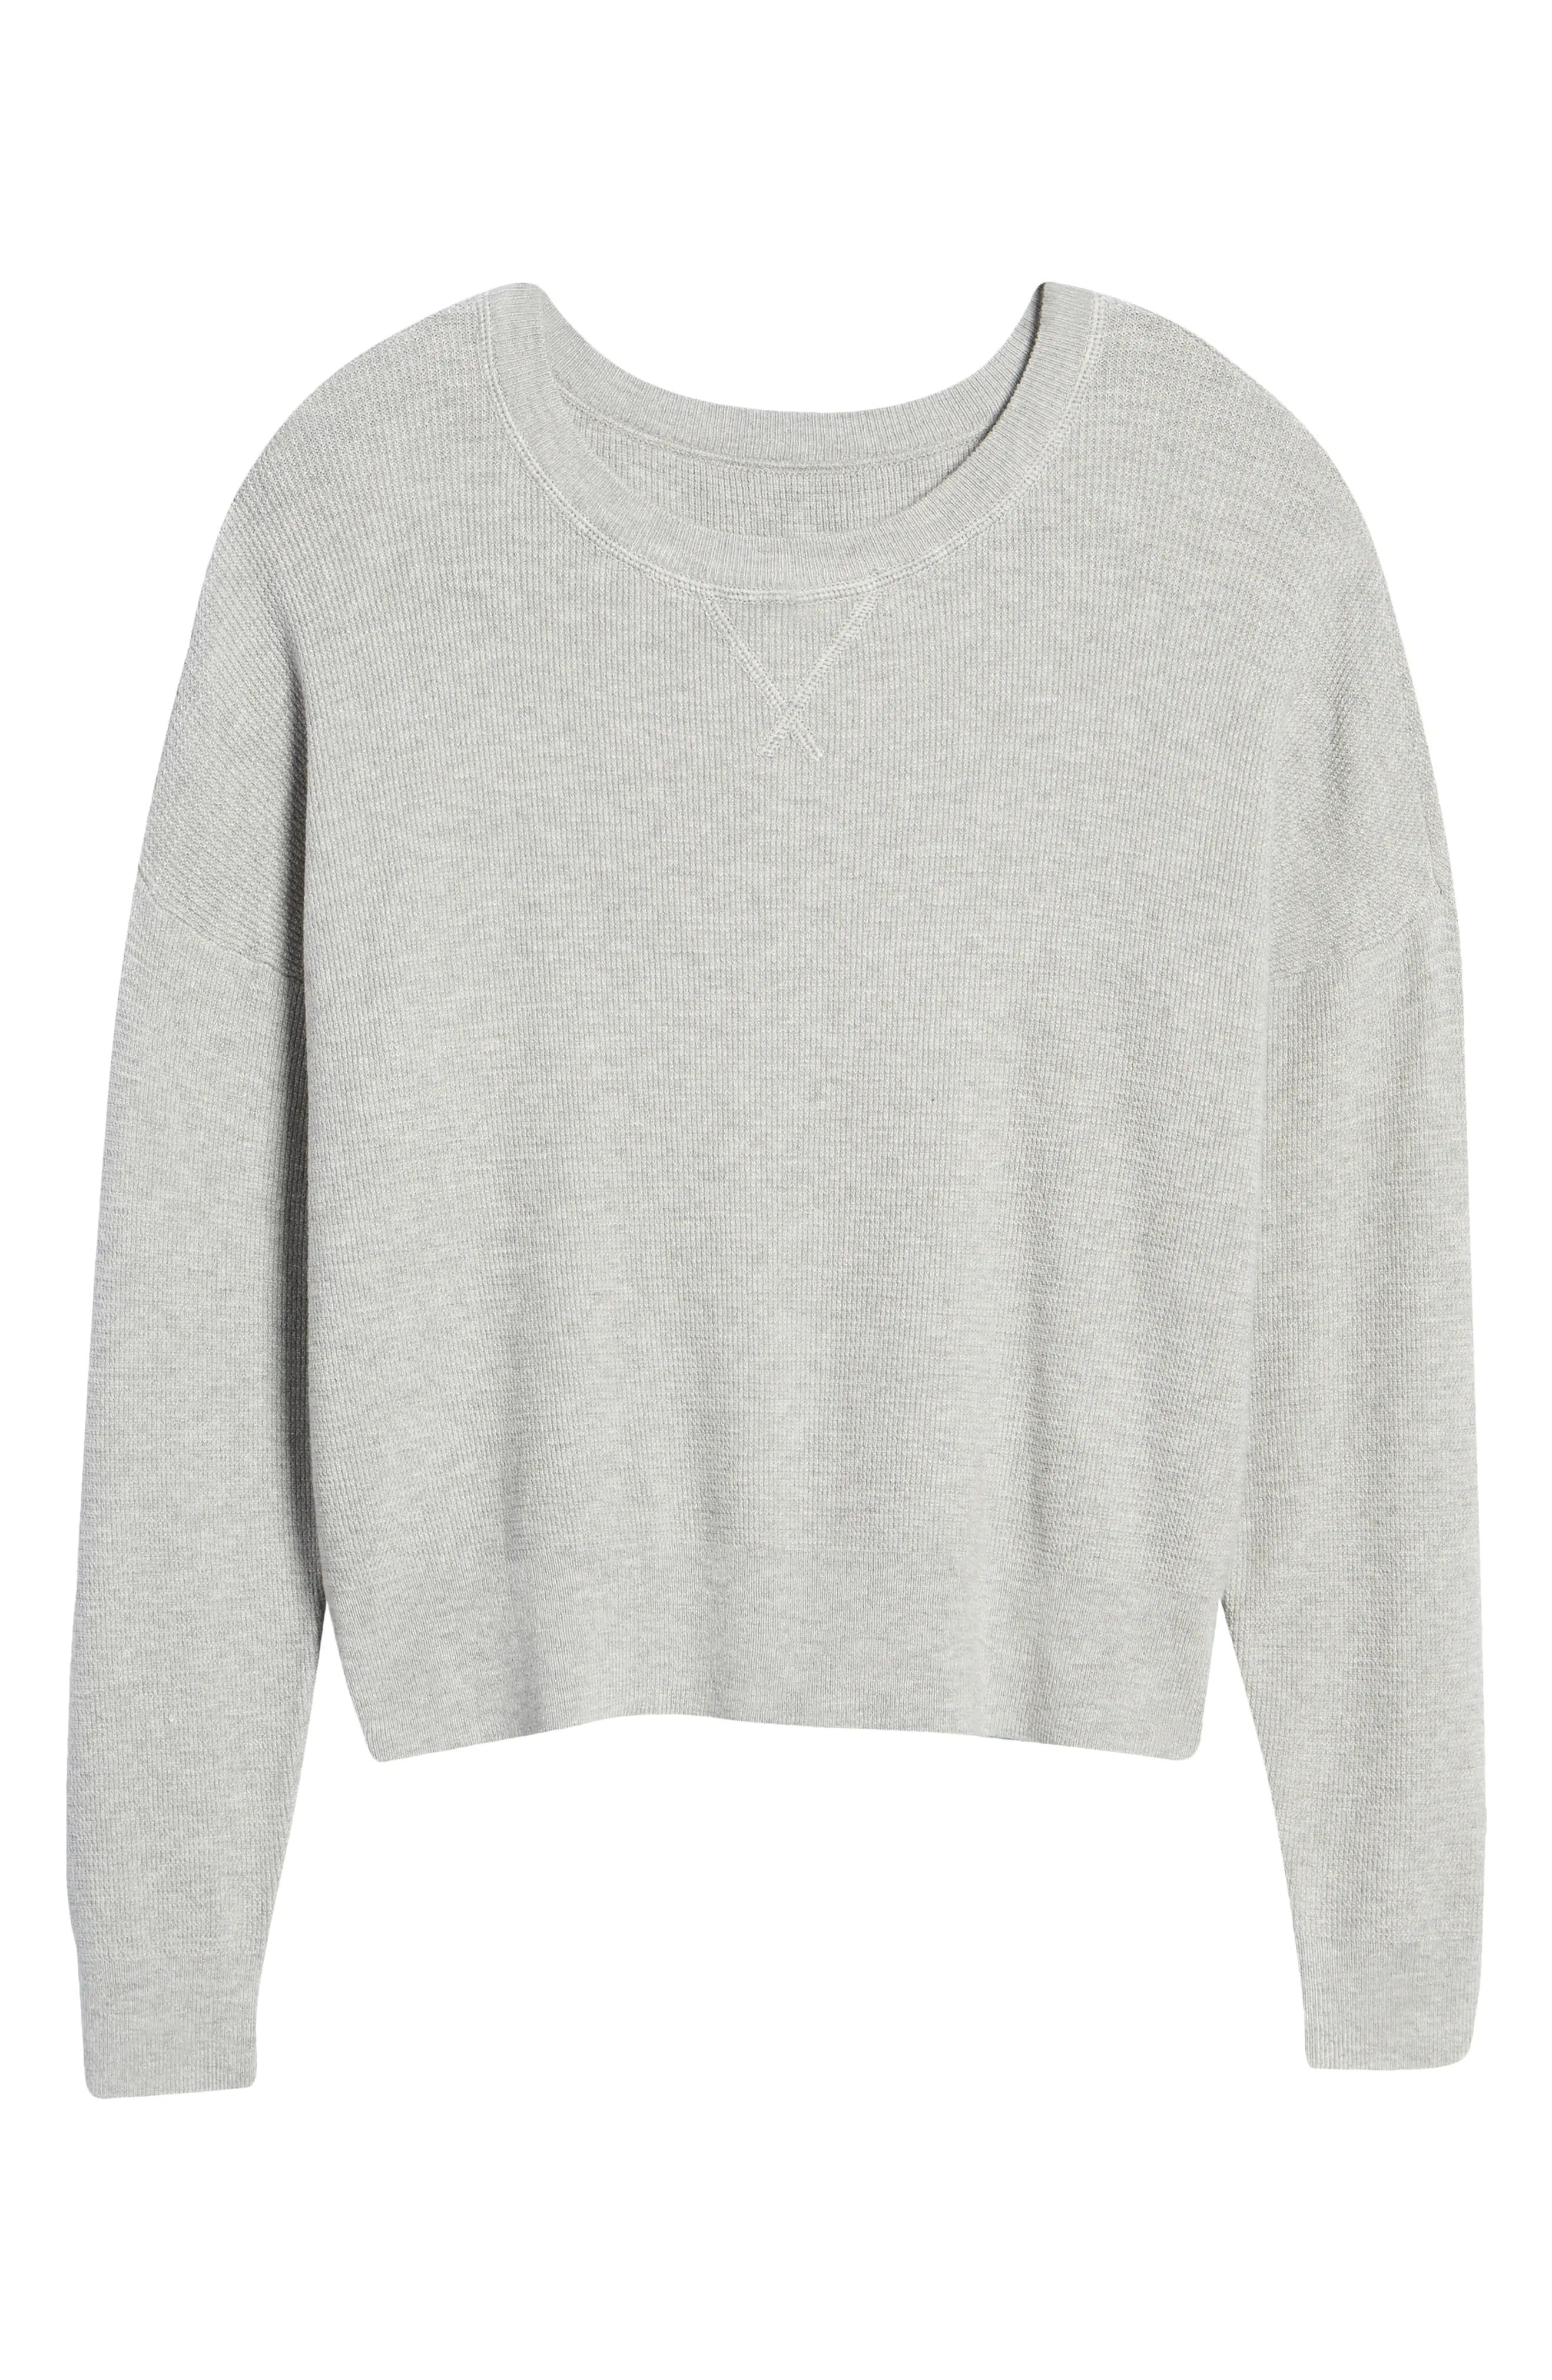 Souchy Thermal Sweater | Nordstrom